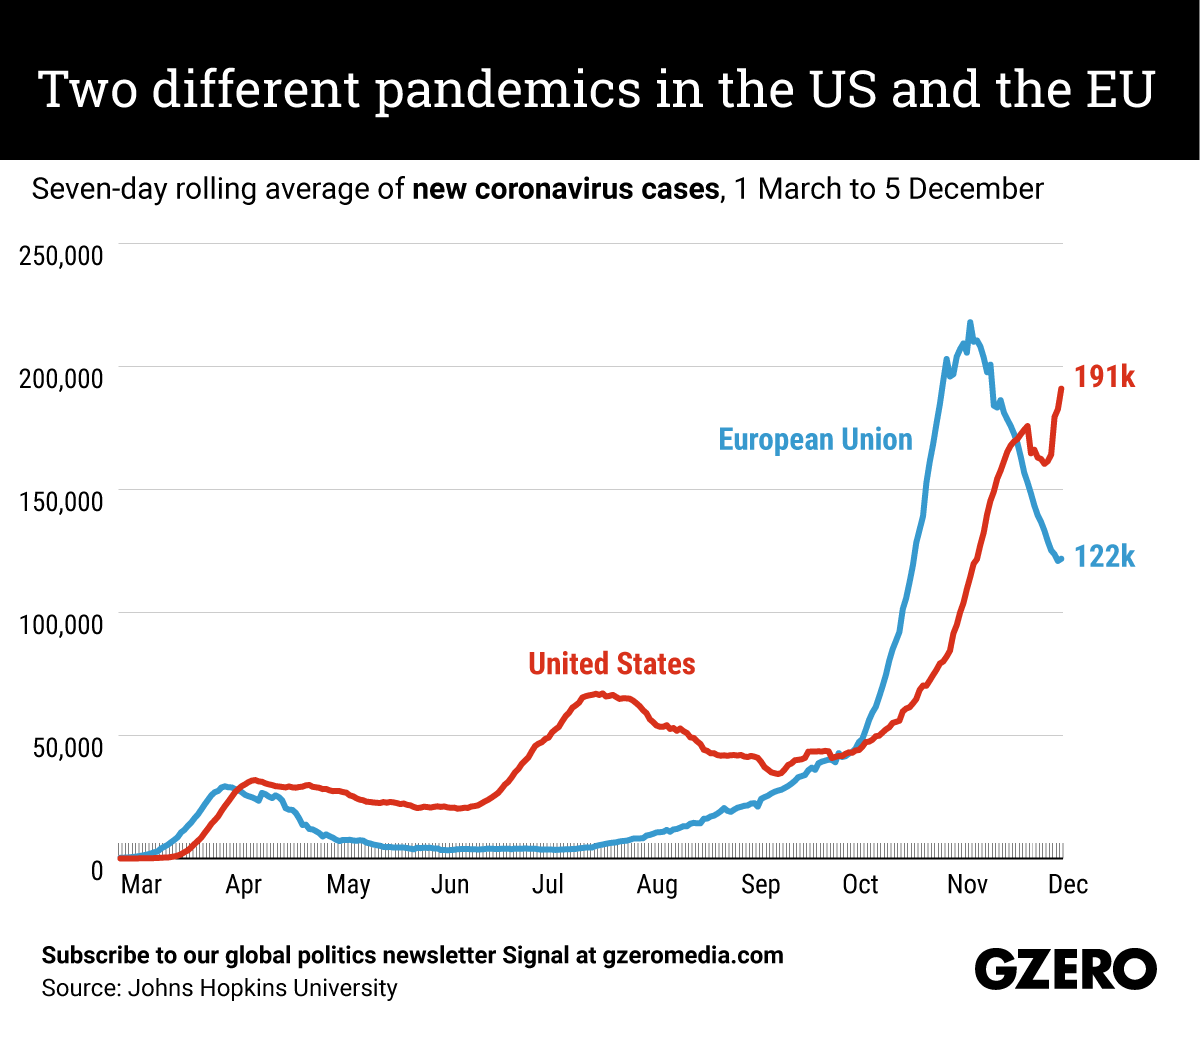 The Graphic Truth: Two different pandemics - EU vs US